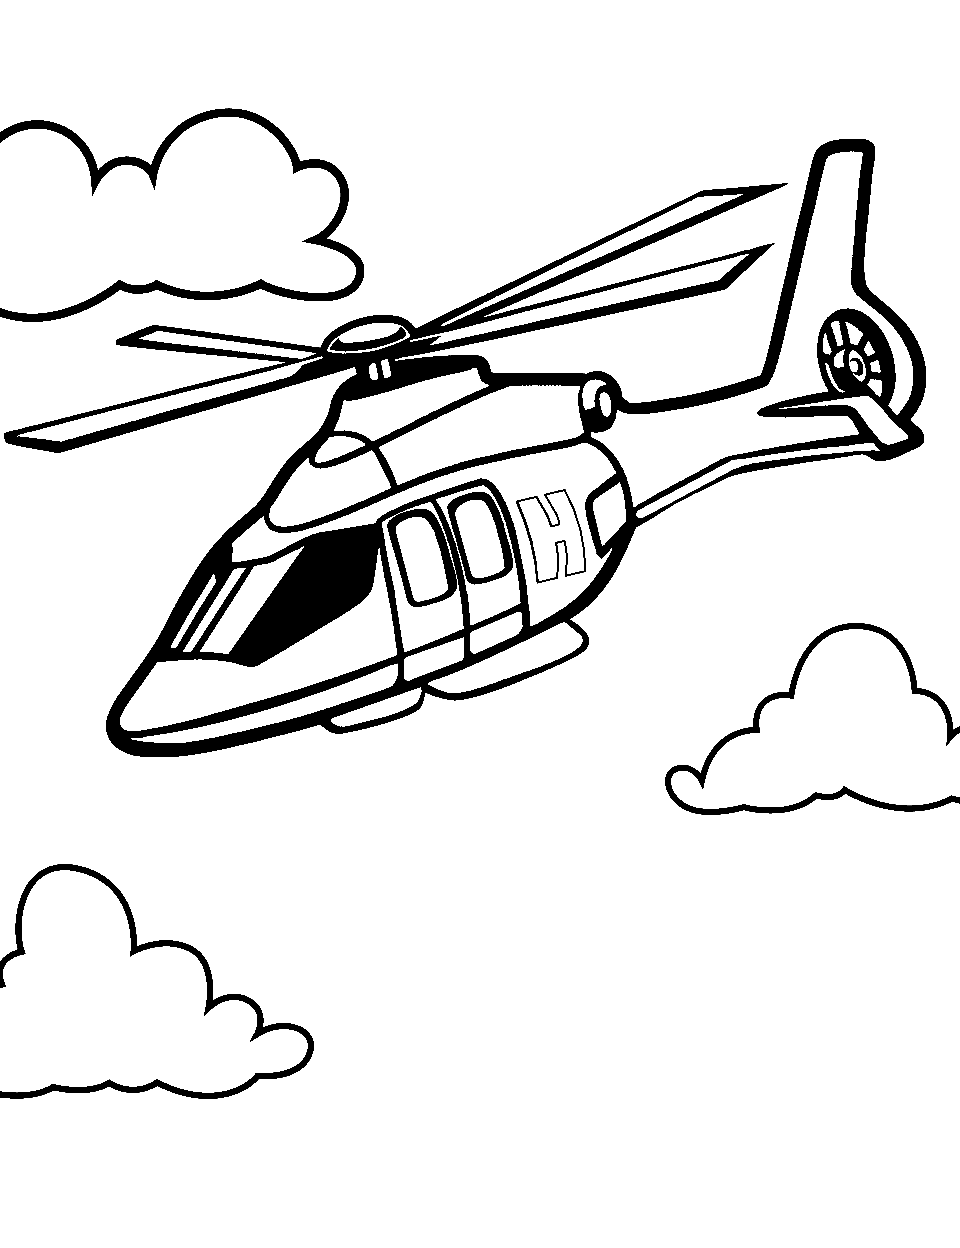 Air Ambulance in Action Airplane Coloring Page - An air ambulance helicopter rushing to a hospital.